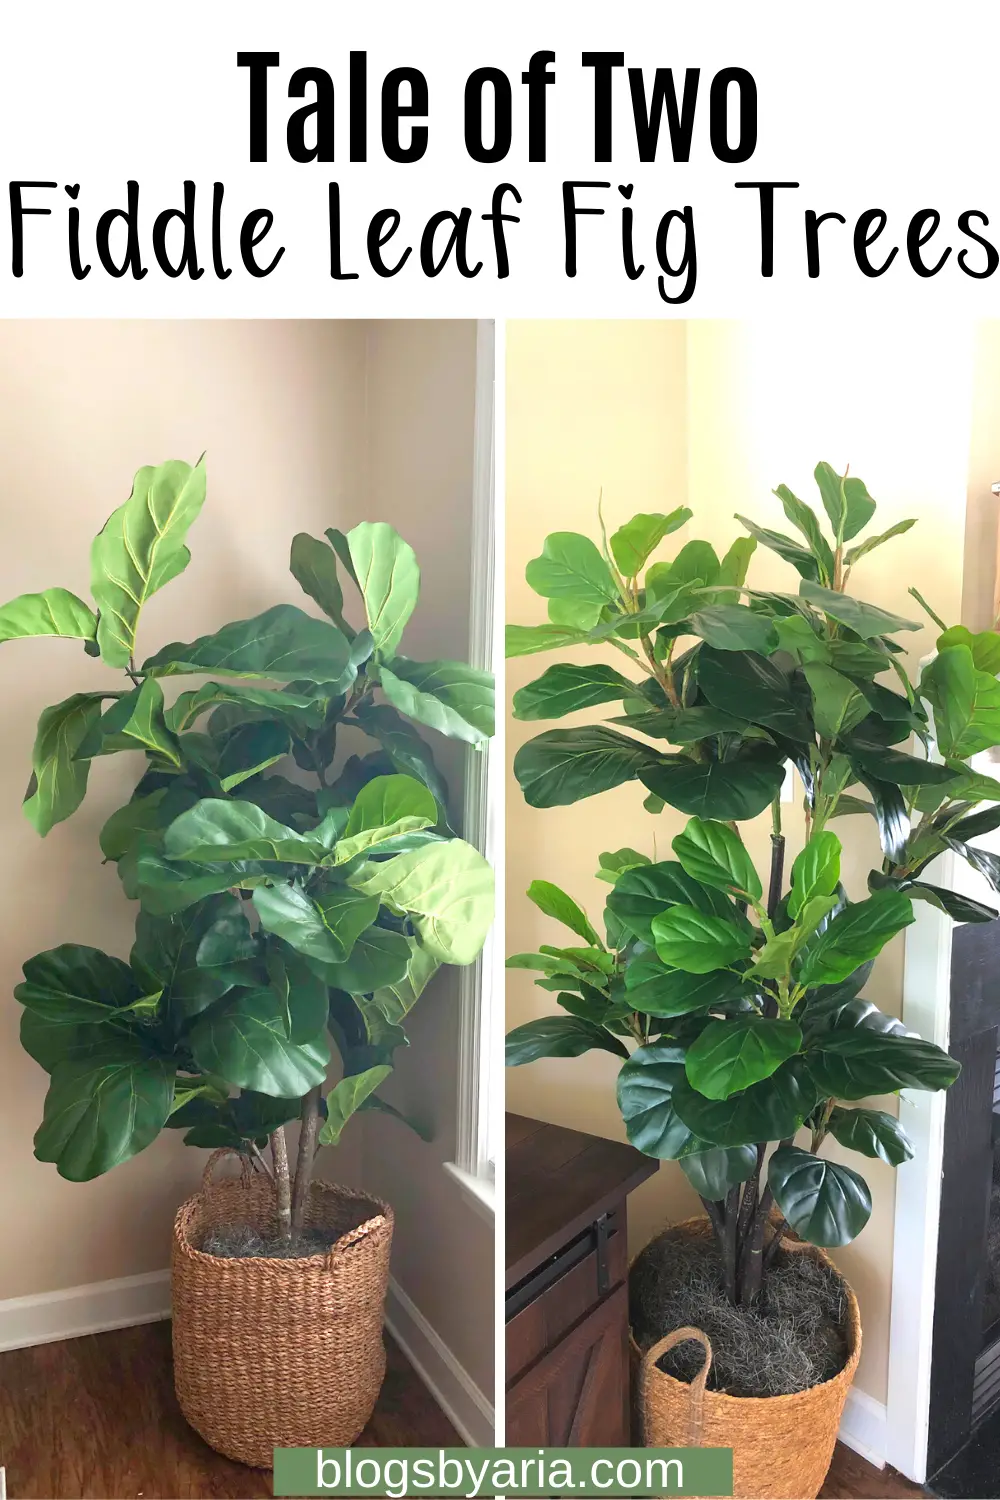 Tale of Two Fiddle Leaf Fig Trees